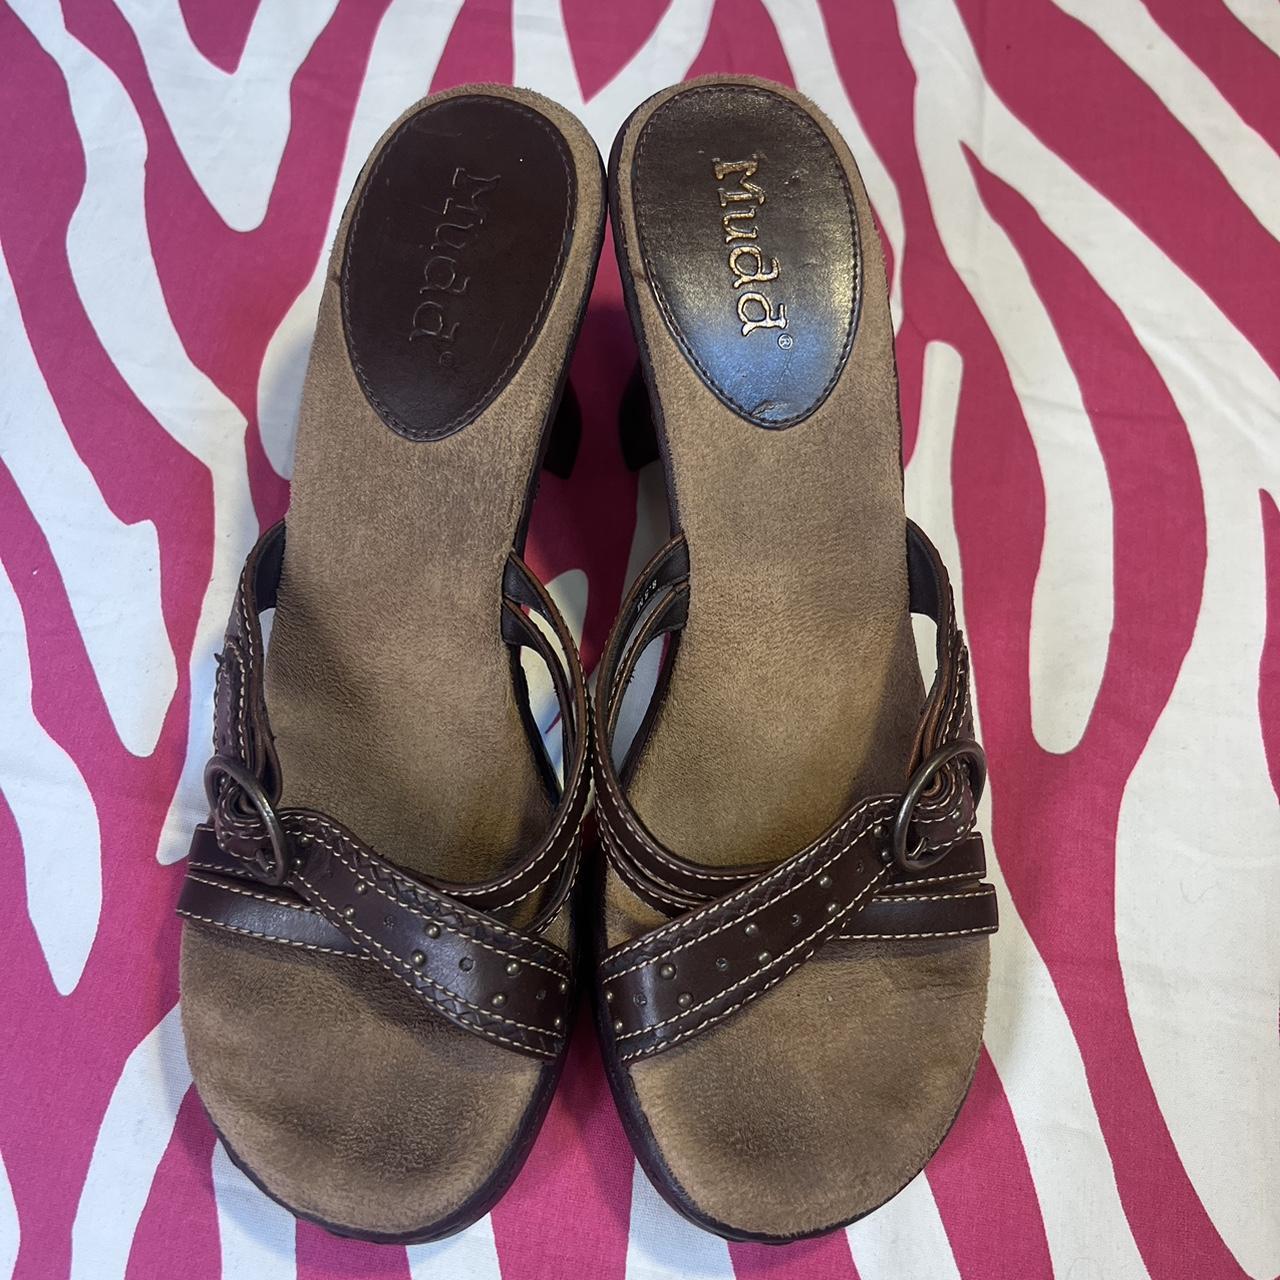 Mudd Clothing Women's Tan and Brown Sandals | Depop